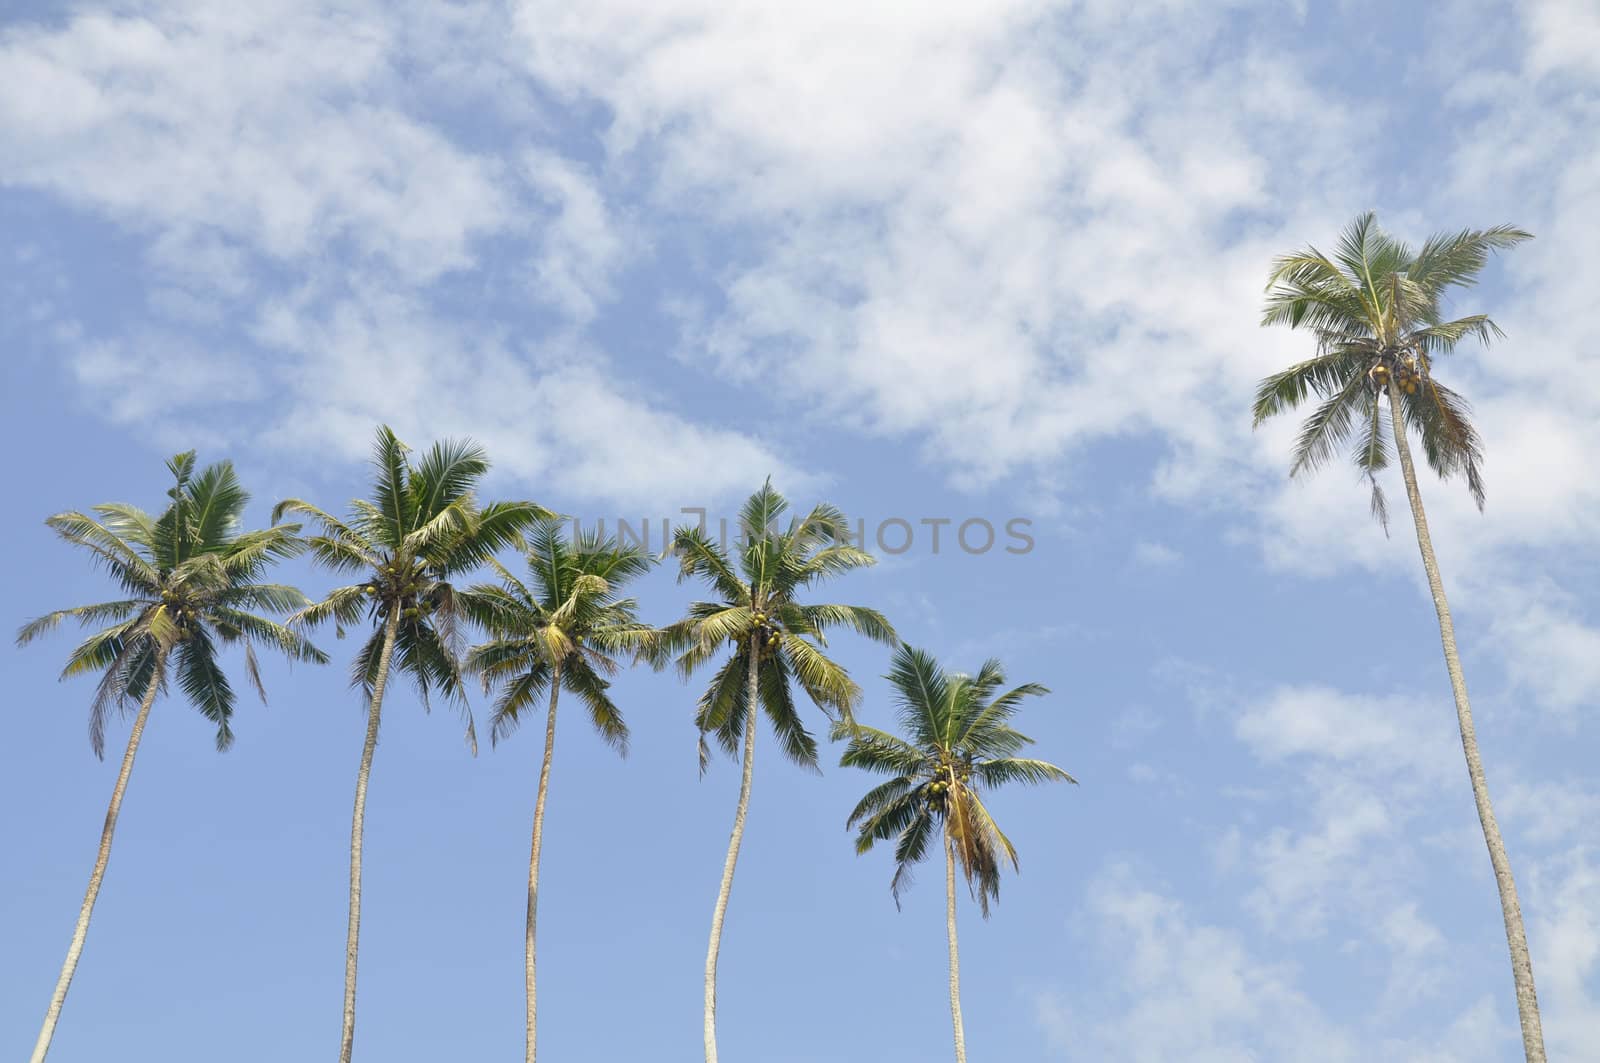 Palm trees against a beautiful clear sky by kdreams02